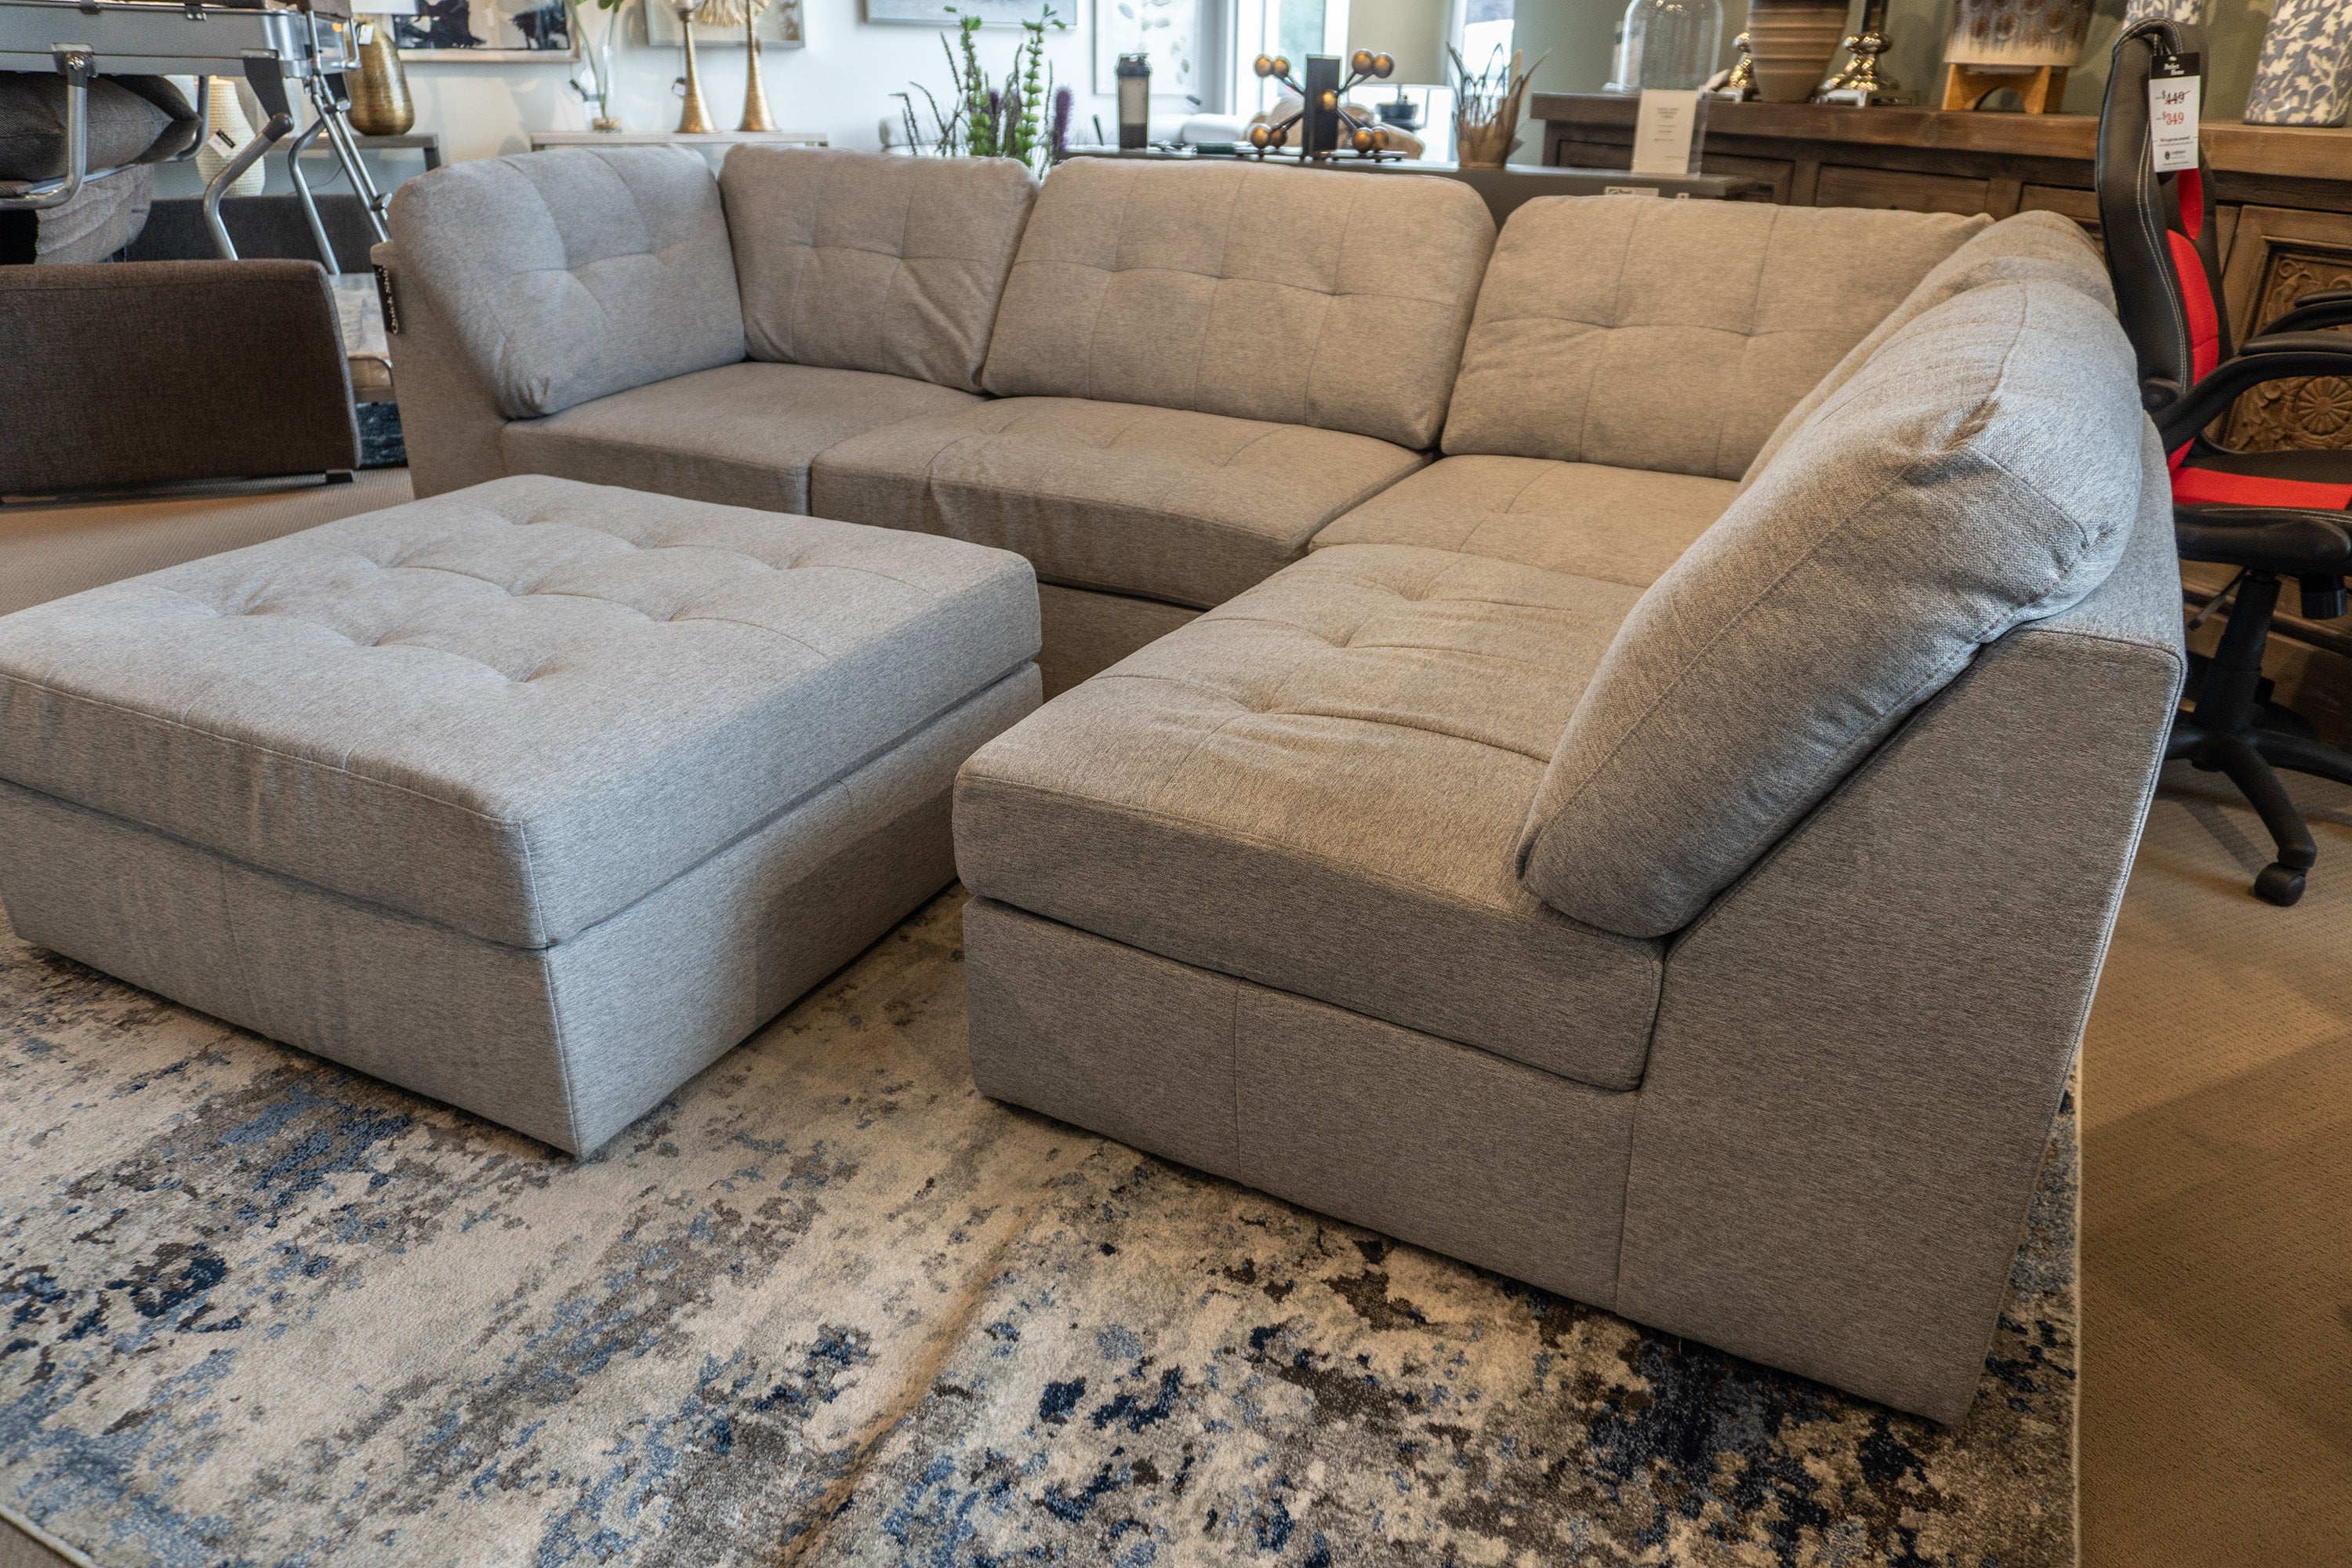 Our Top Selling Sectional!